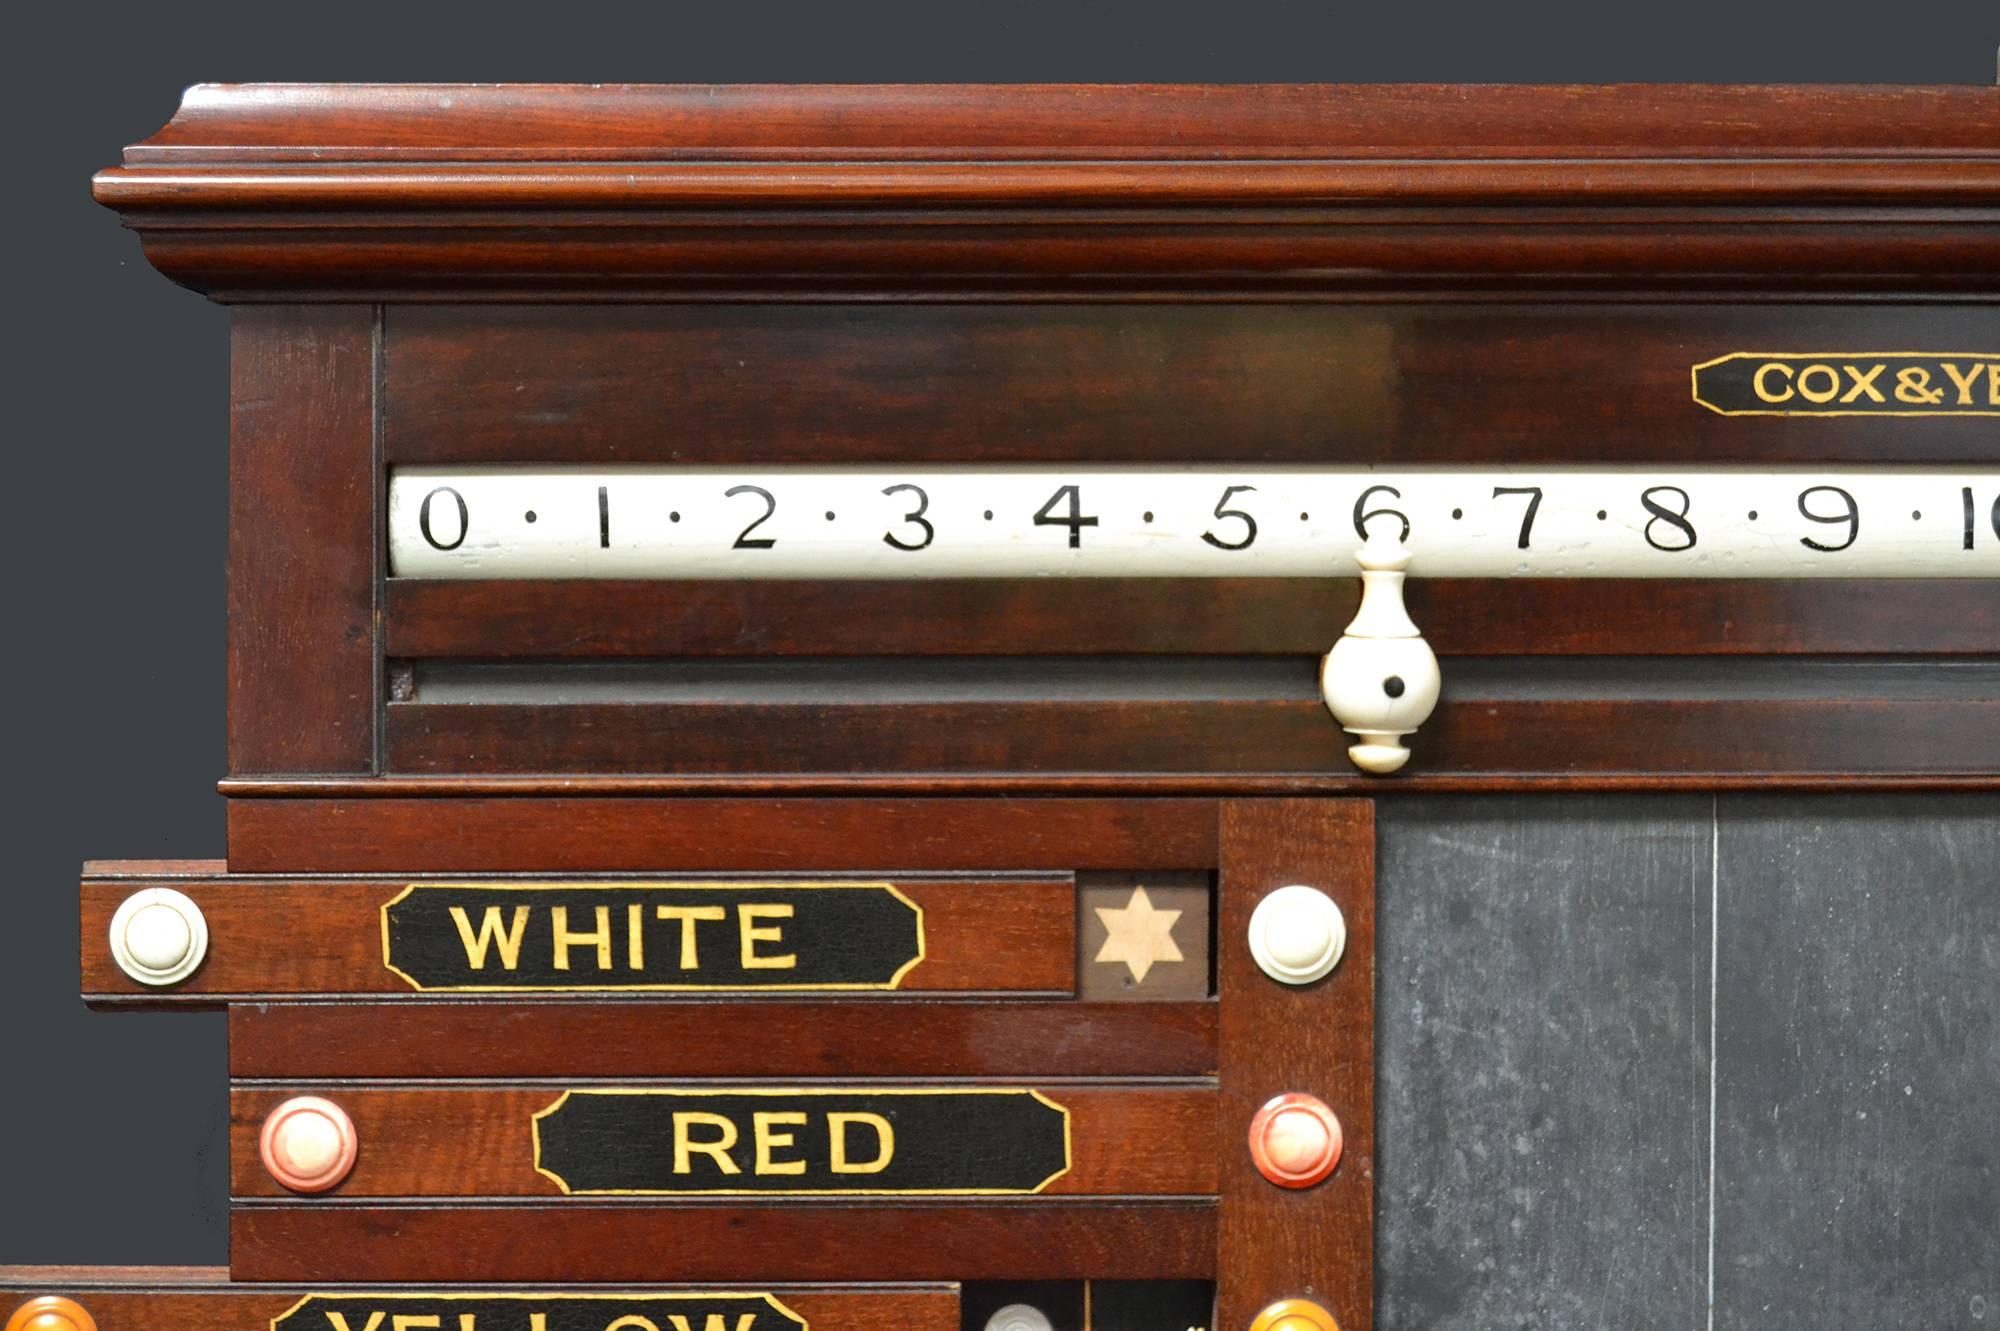 A beautiful mahogany framed scoring cabinet by Cox & Yeman, circa 1860, featuring hand-painted sliding panels, revolving numbers and a central slate panel.

Mr Henry Cox and Mr Edward Yeman joined forces at some time in the 1850s to form their own